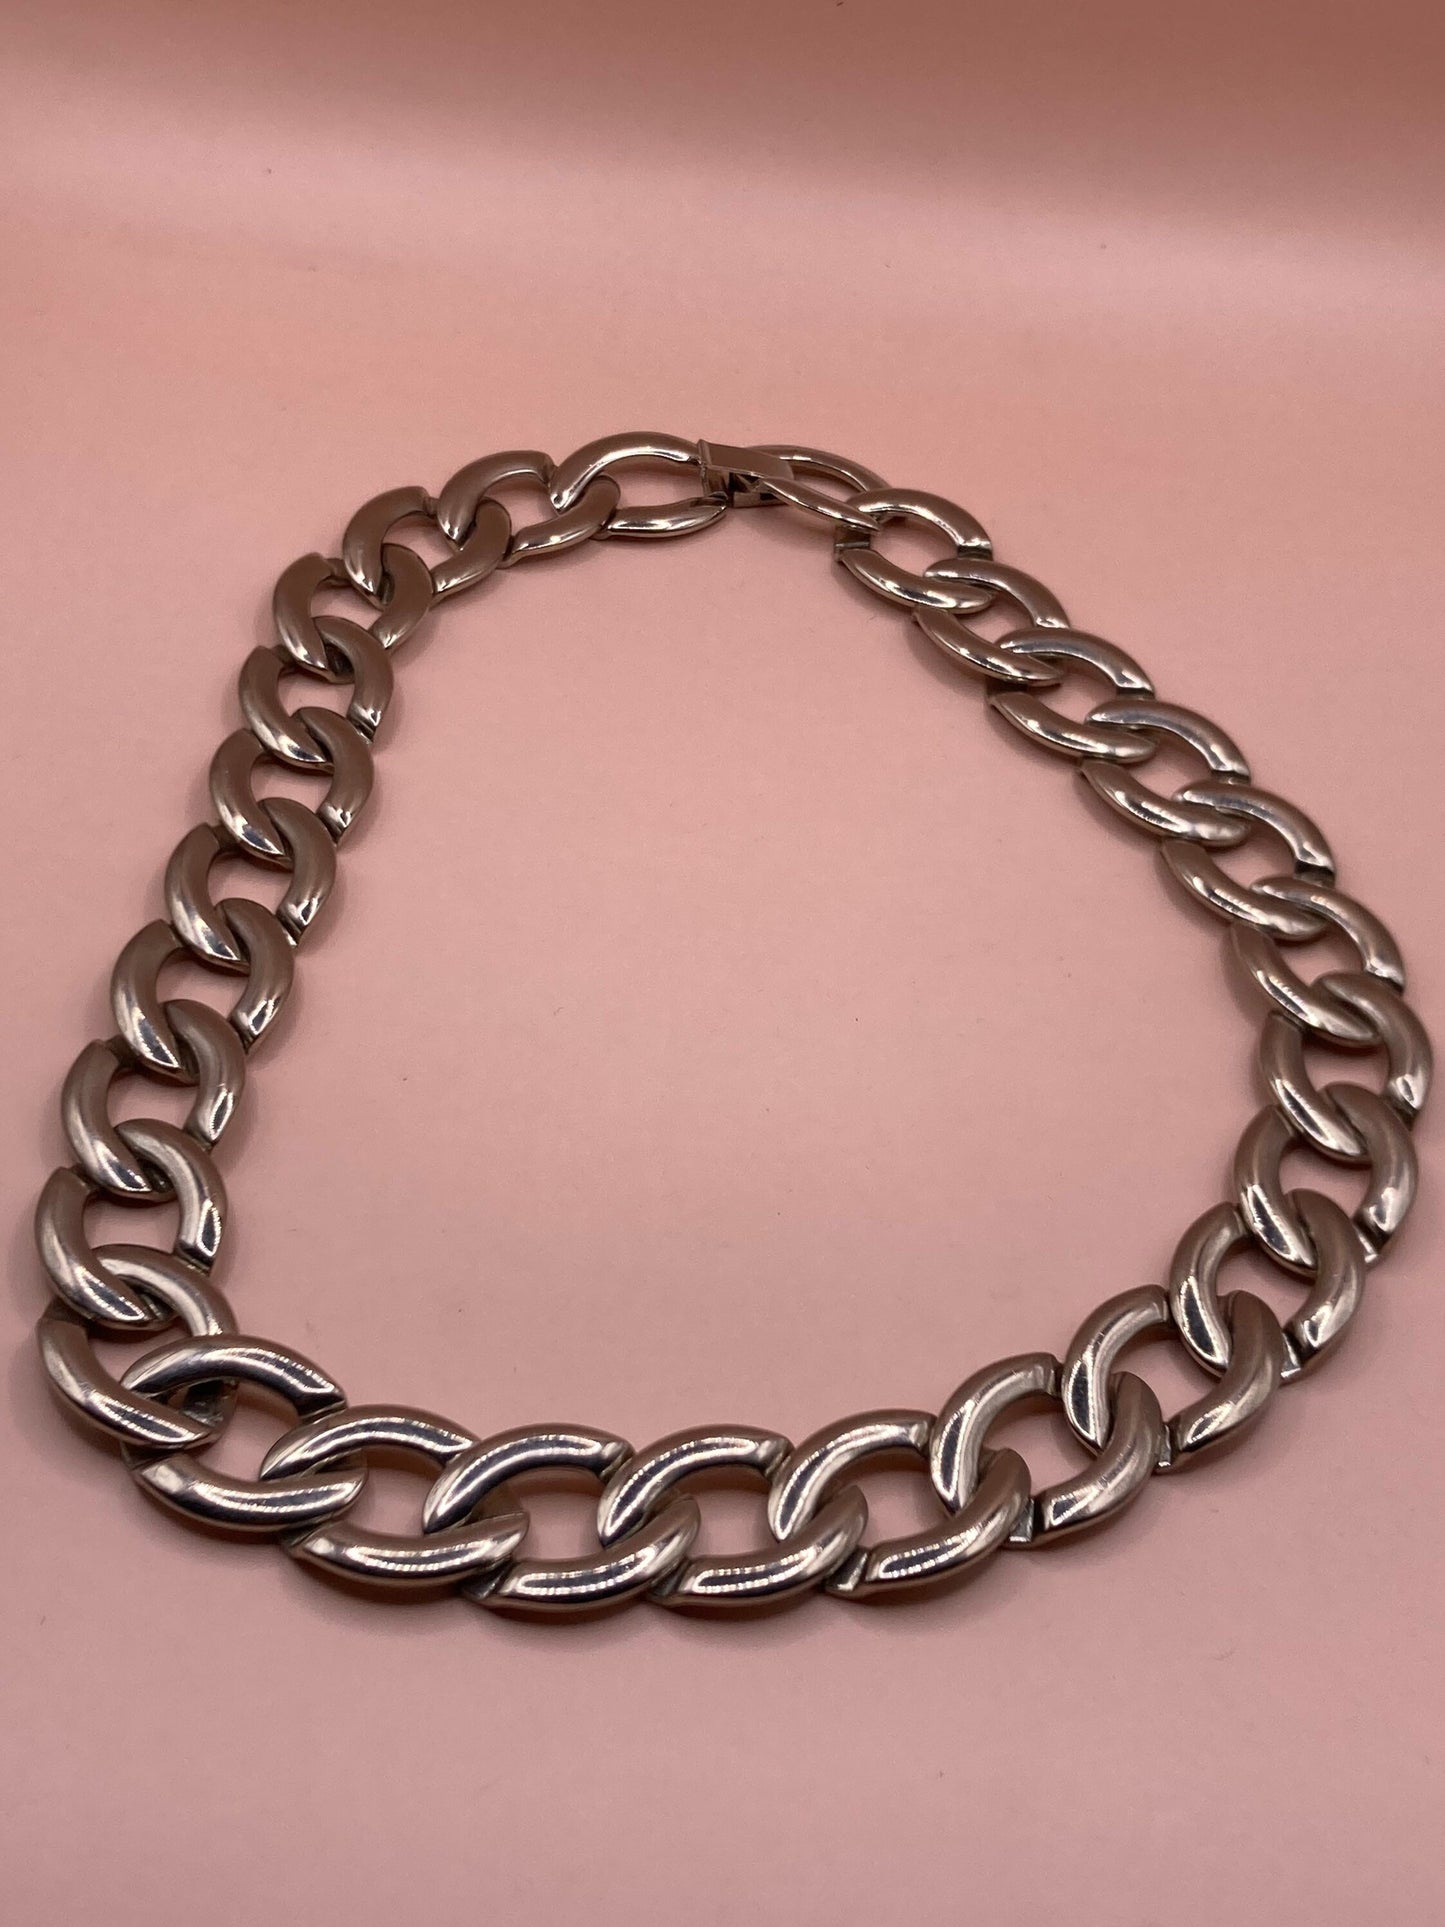 Vintage silver tone Wide chain Link Choker Collar necklace 1980s